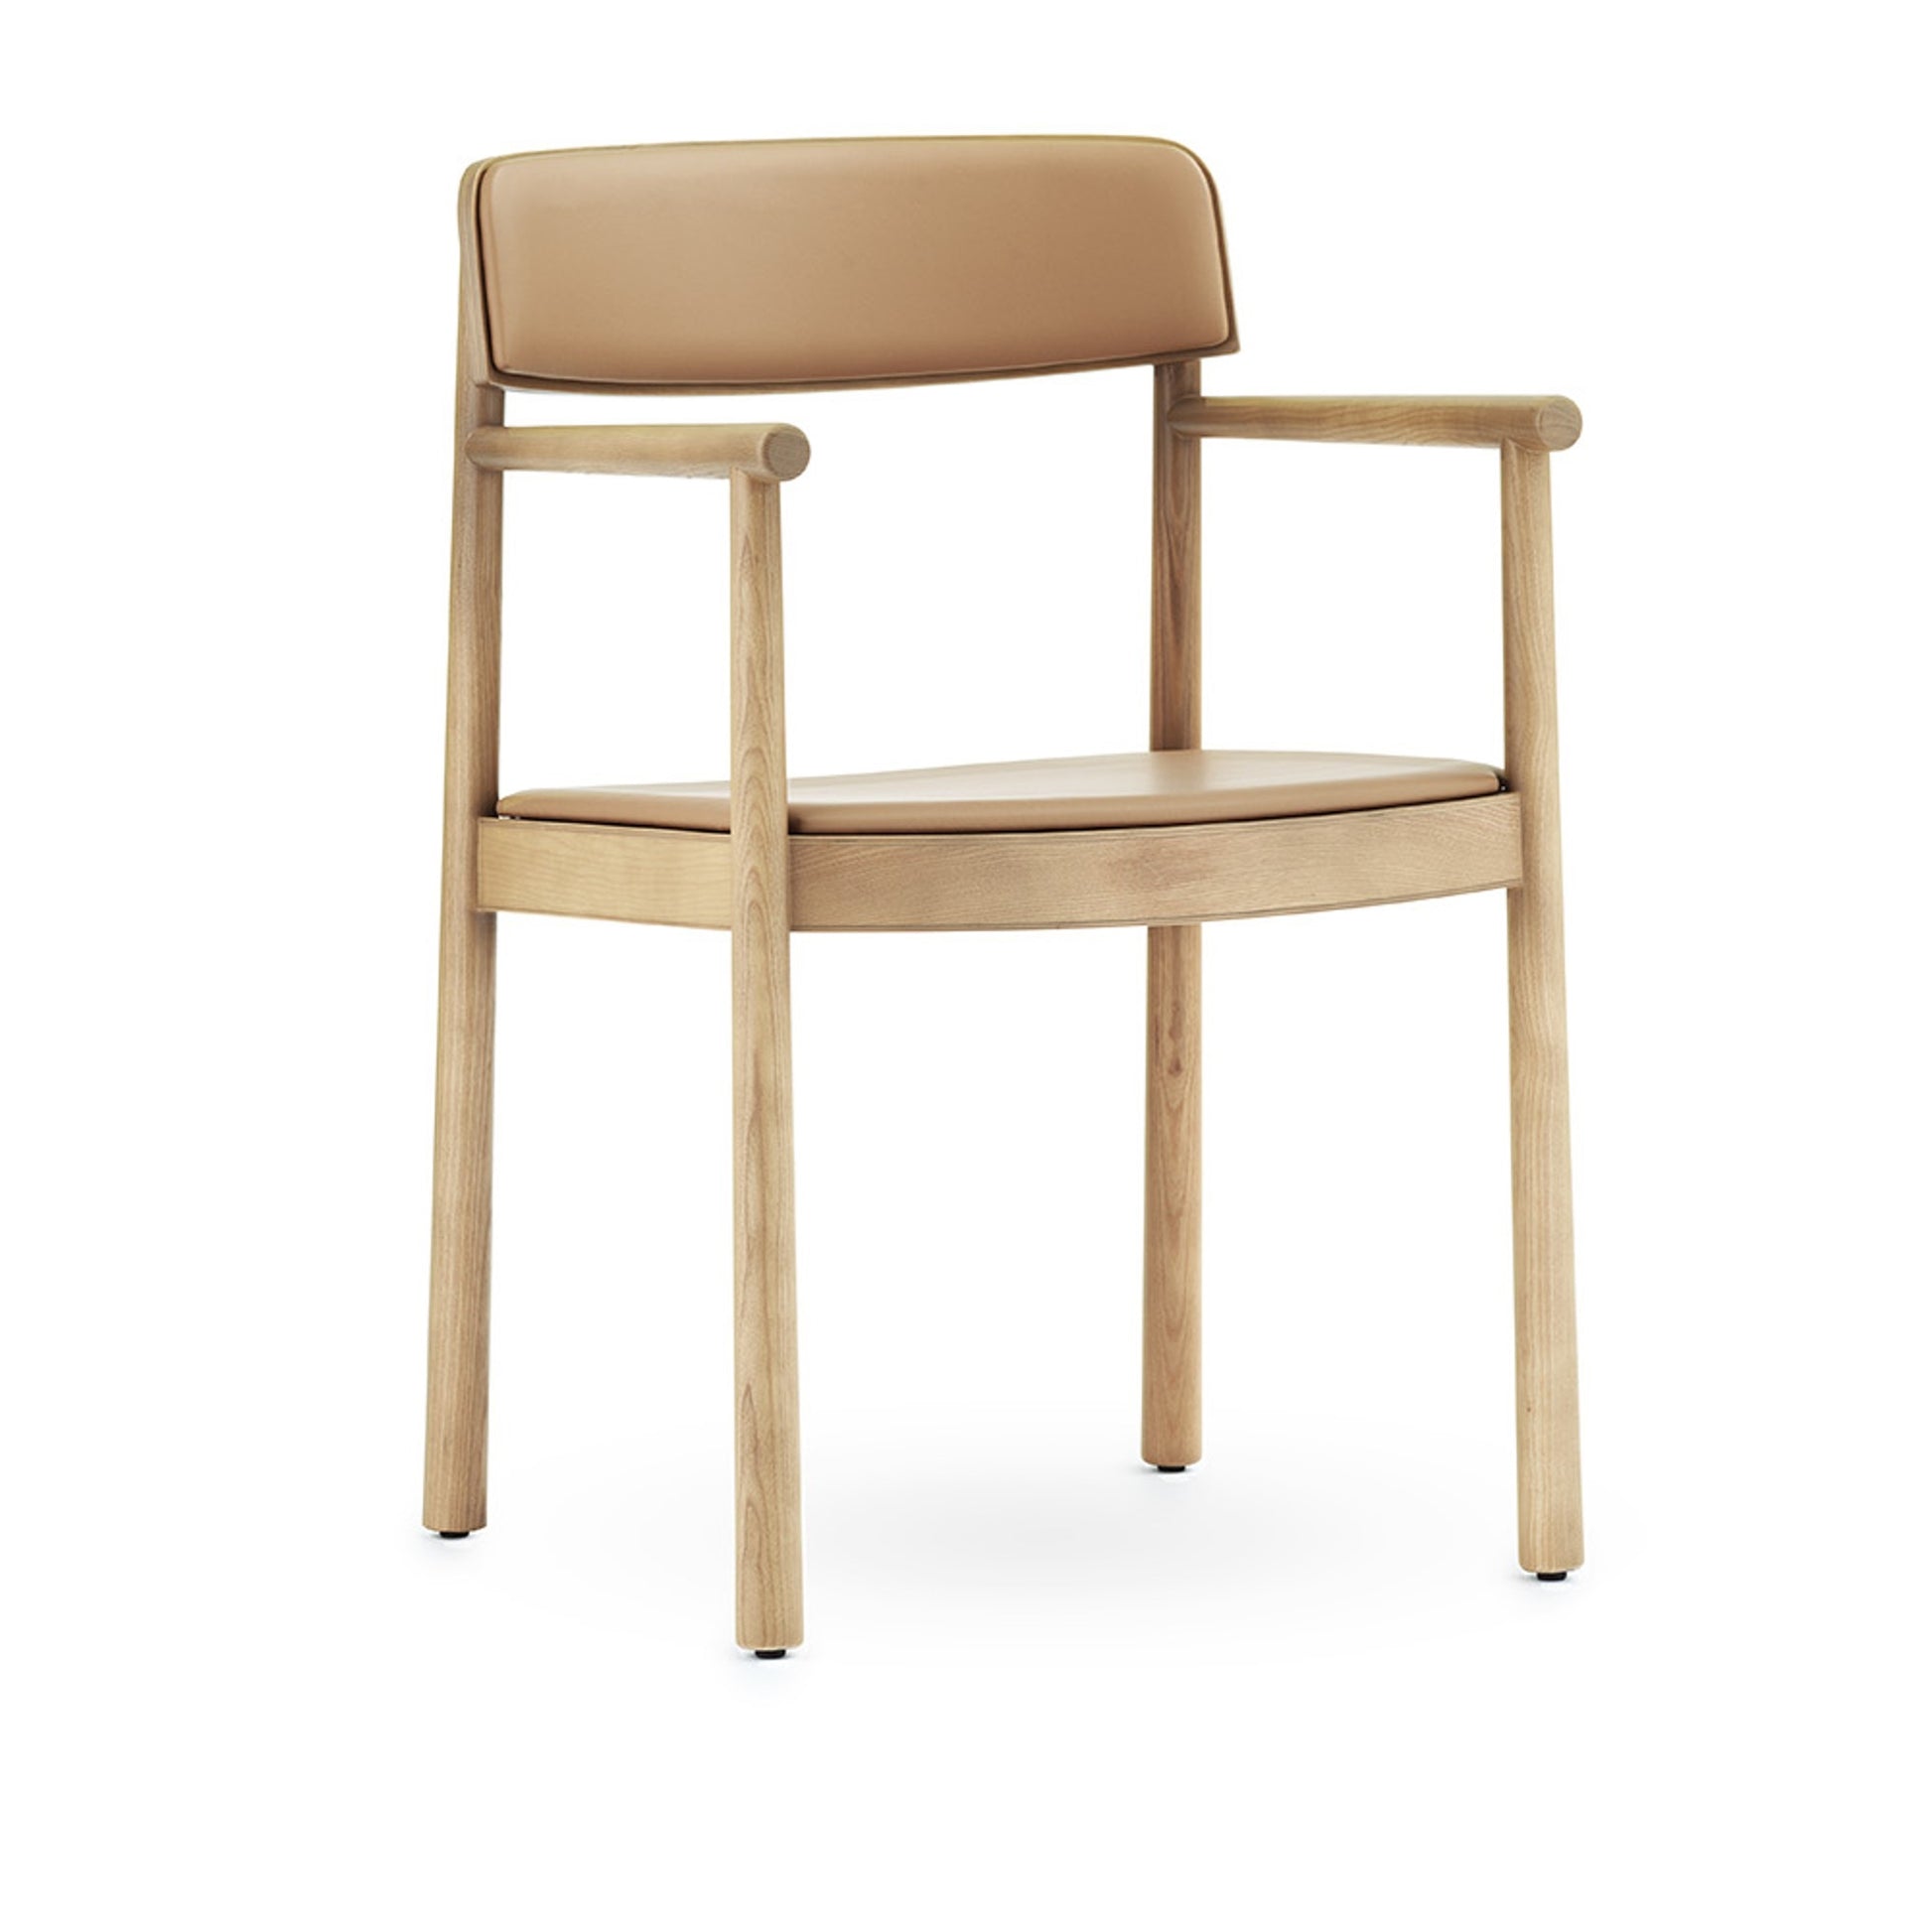 Timb Dining Chair w. Armrests by Normann Copenhagen #Leather Upholstered Tan/Camel